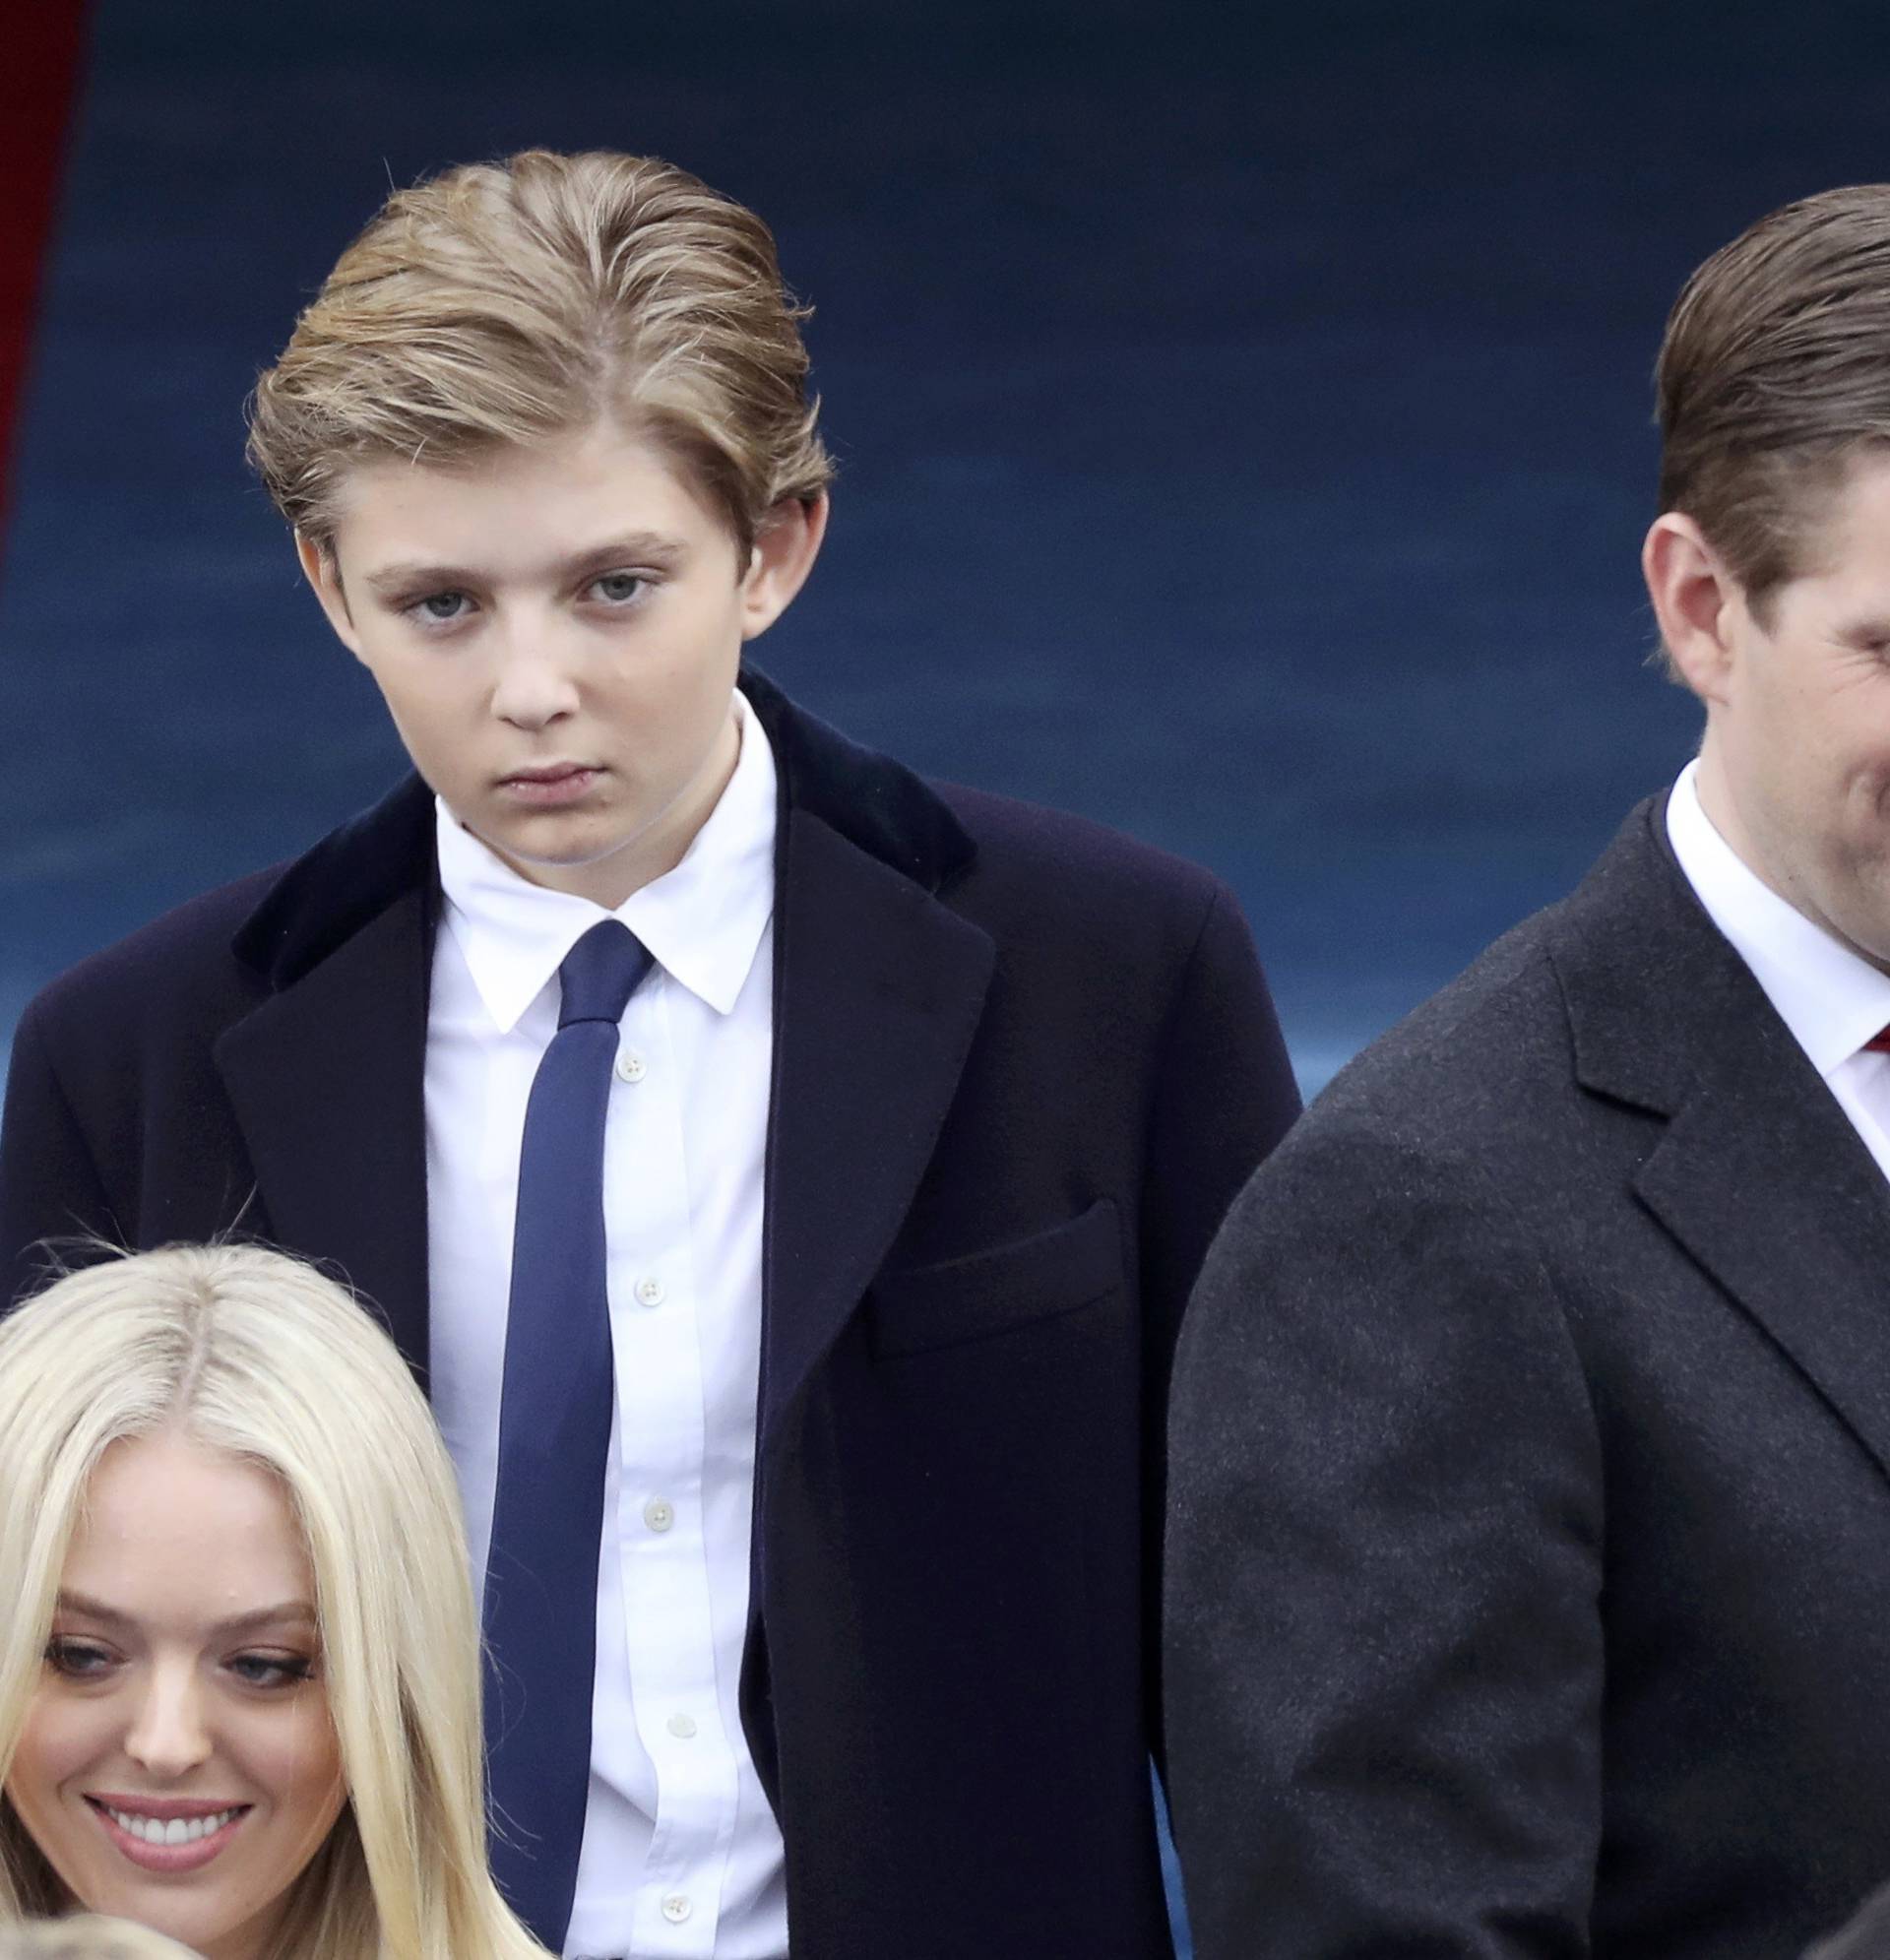 Barron Trump and Eric Trump arrive for inauguration ceremonies swearing in Donald Trump as the 45th president of the United States on the West front of the U.S. Capitol in Washington